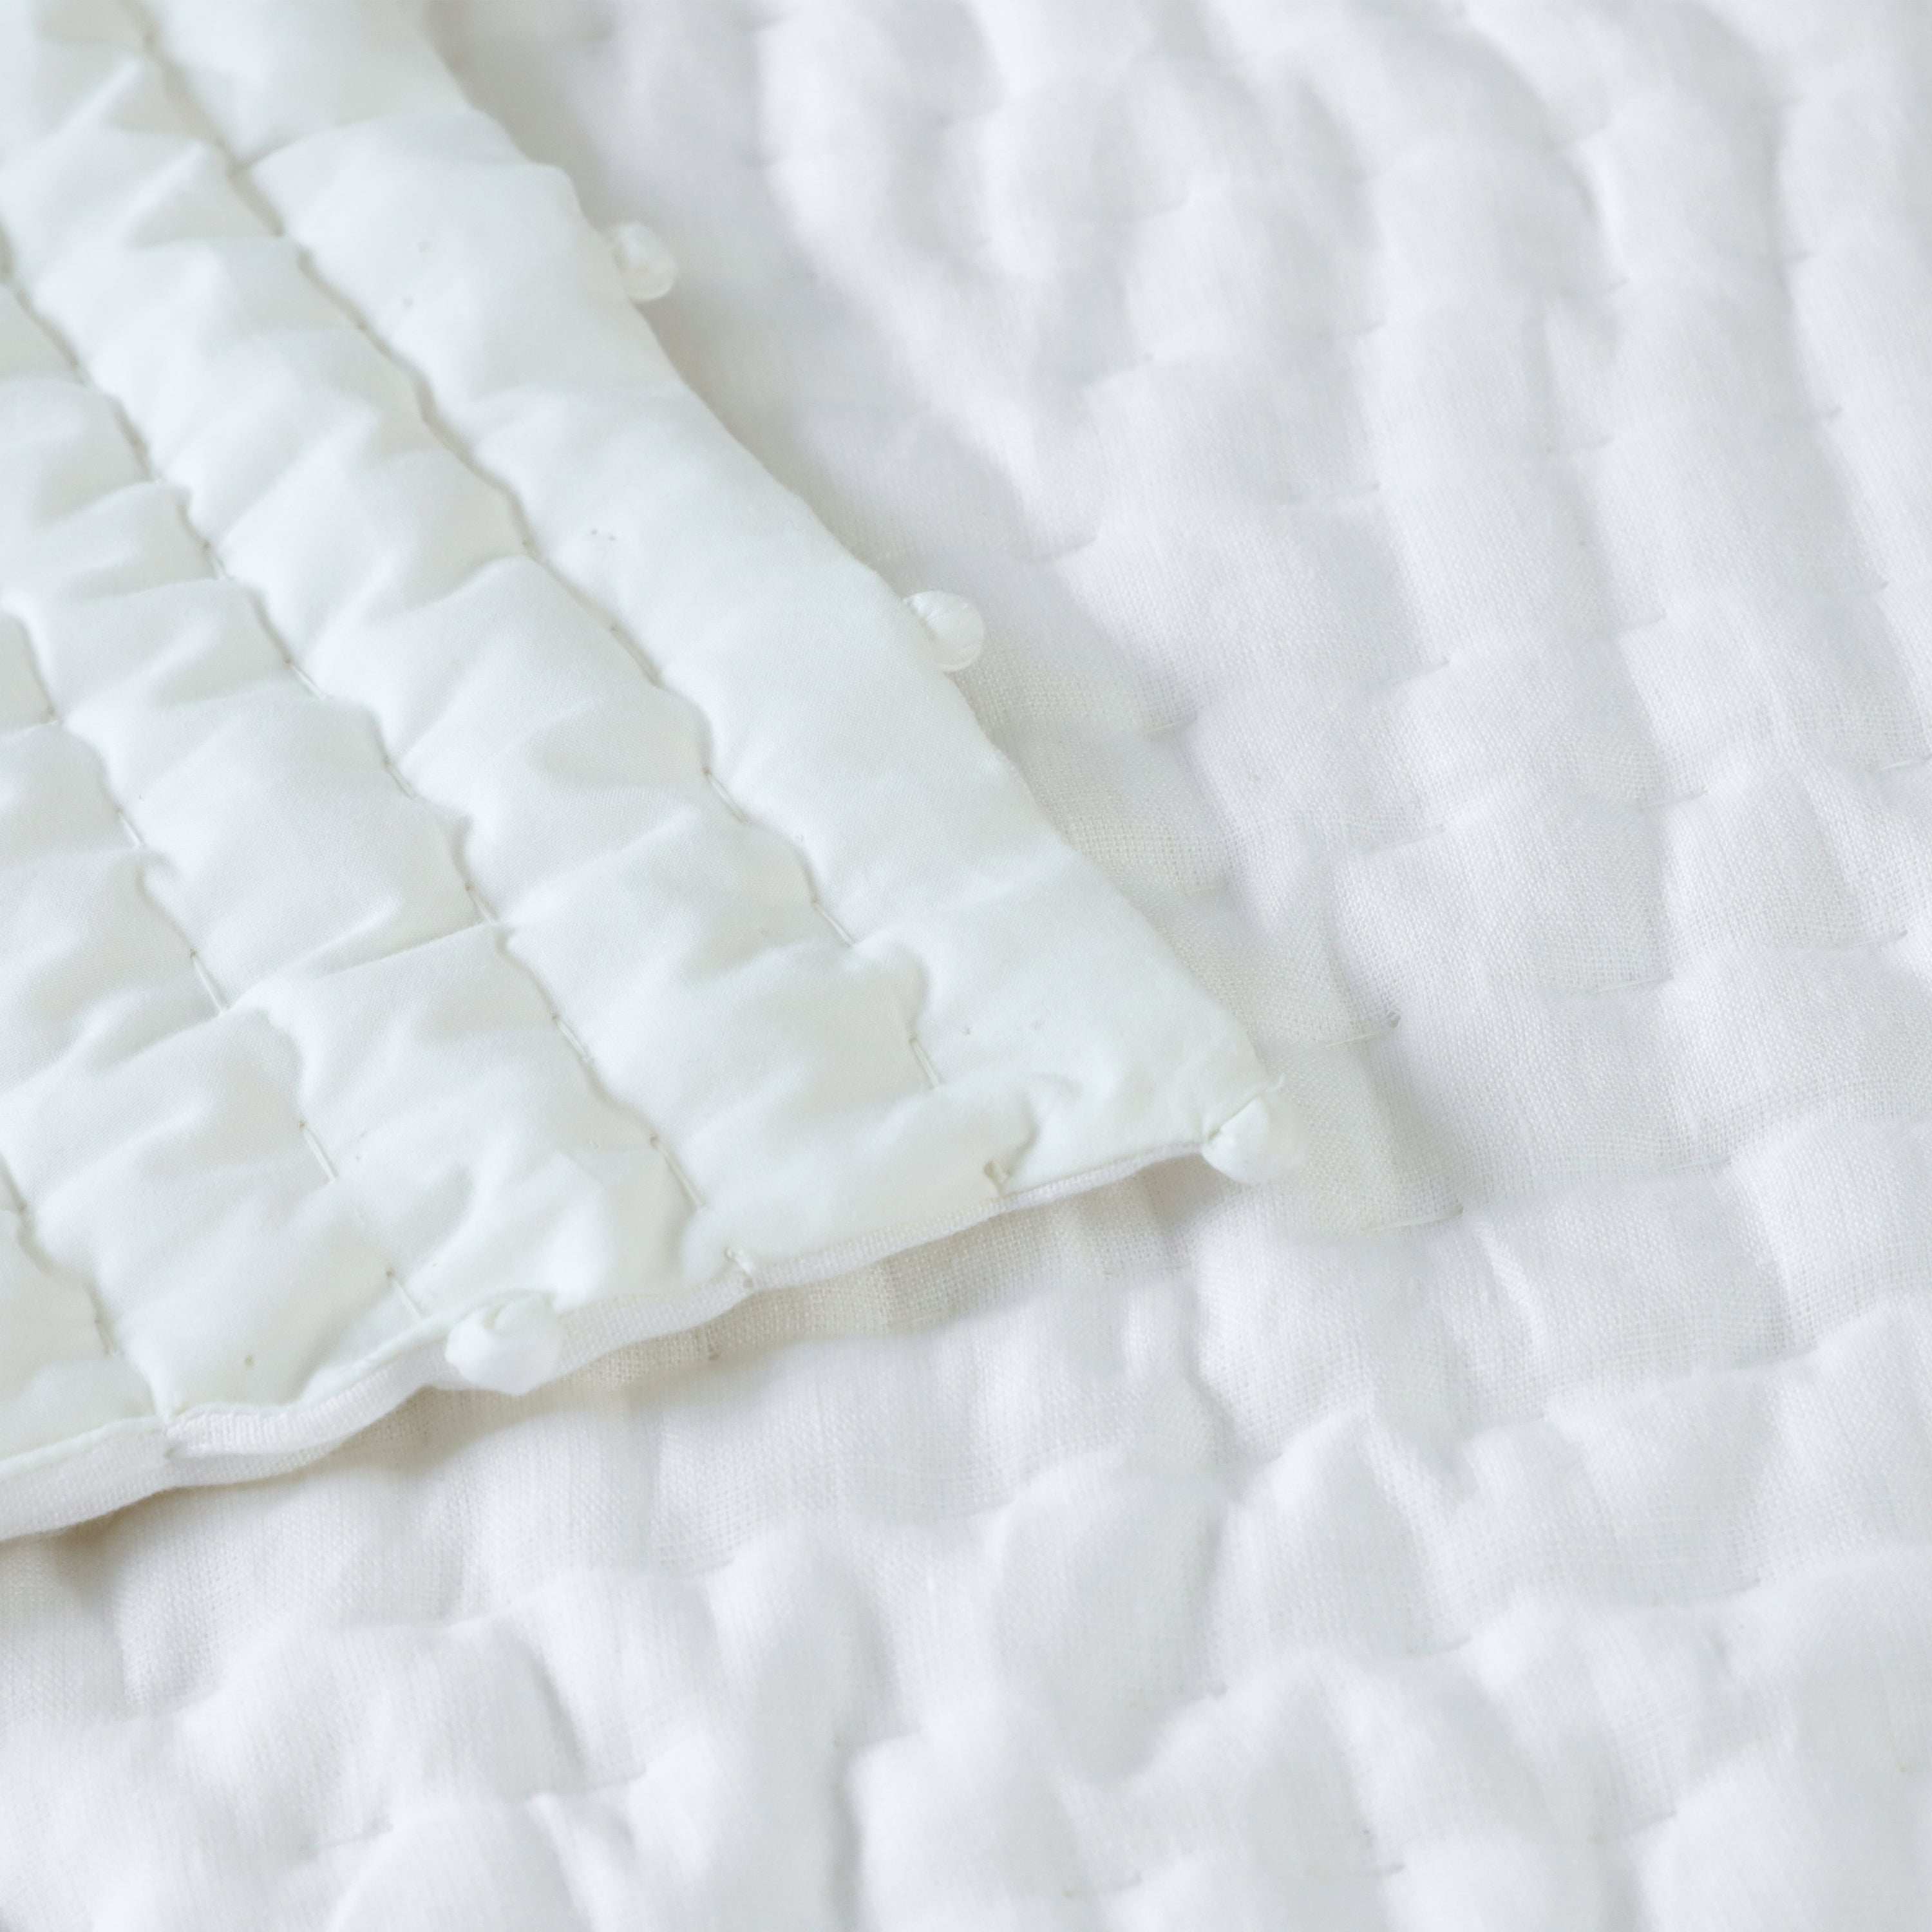 Handcrafted pick-stitch quilt stays soft and flawless wash after wash.